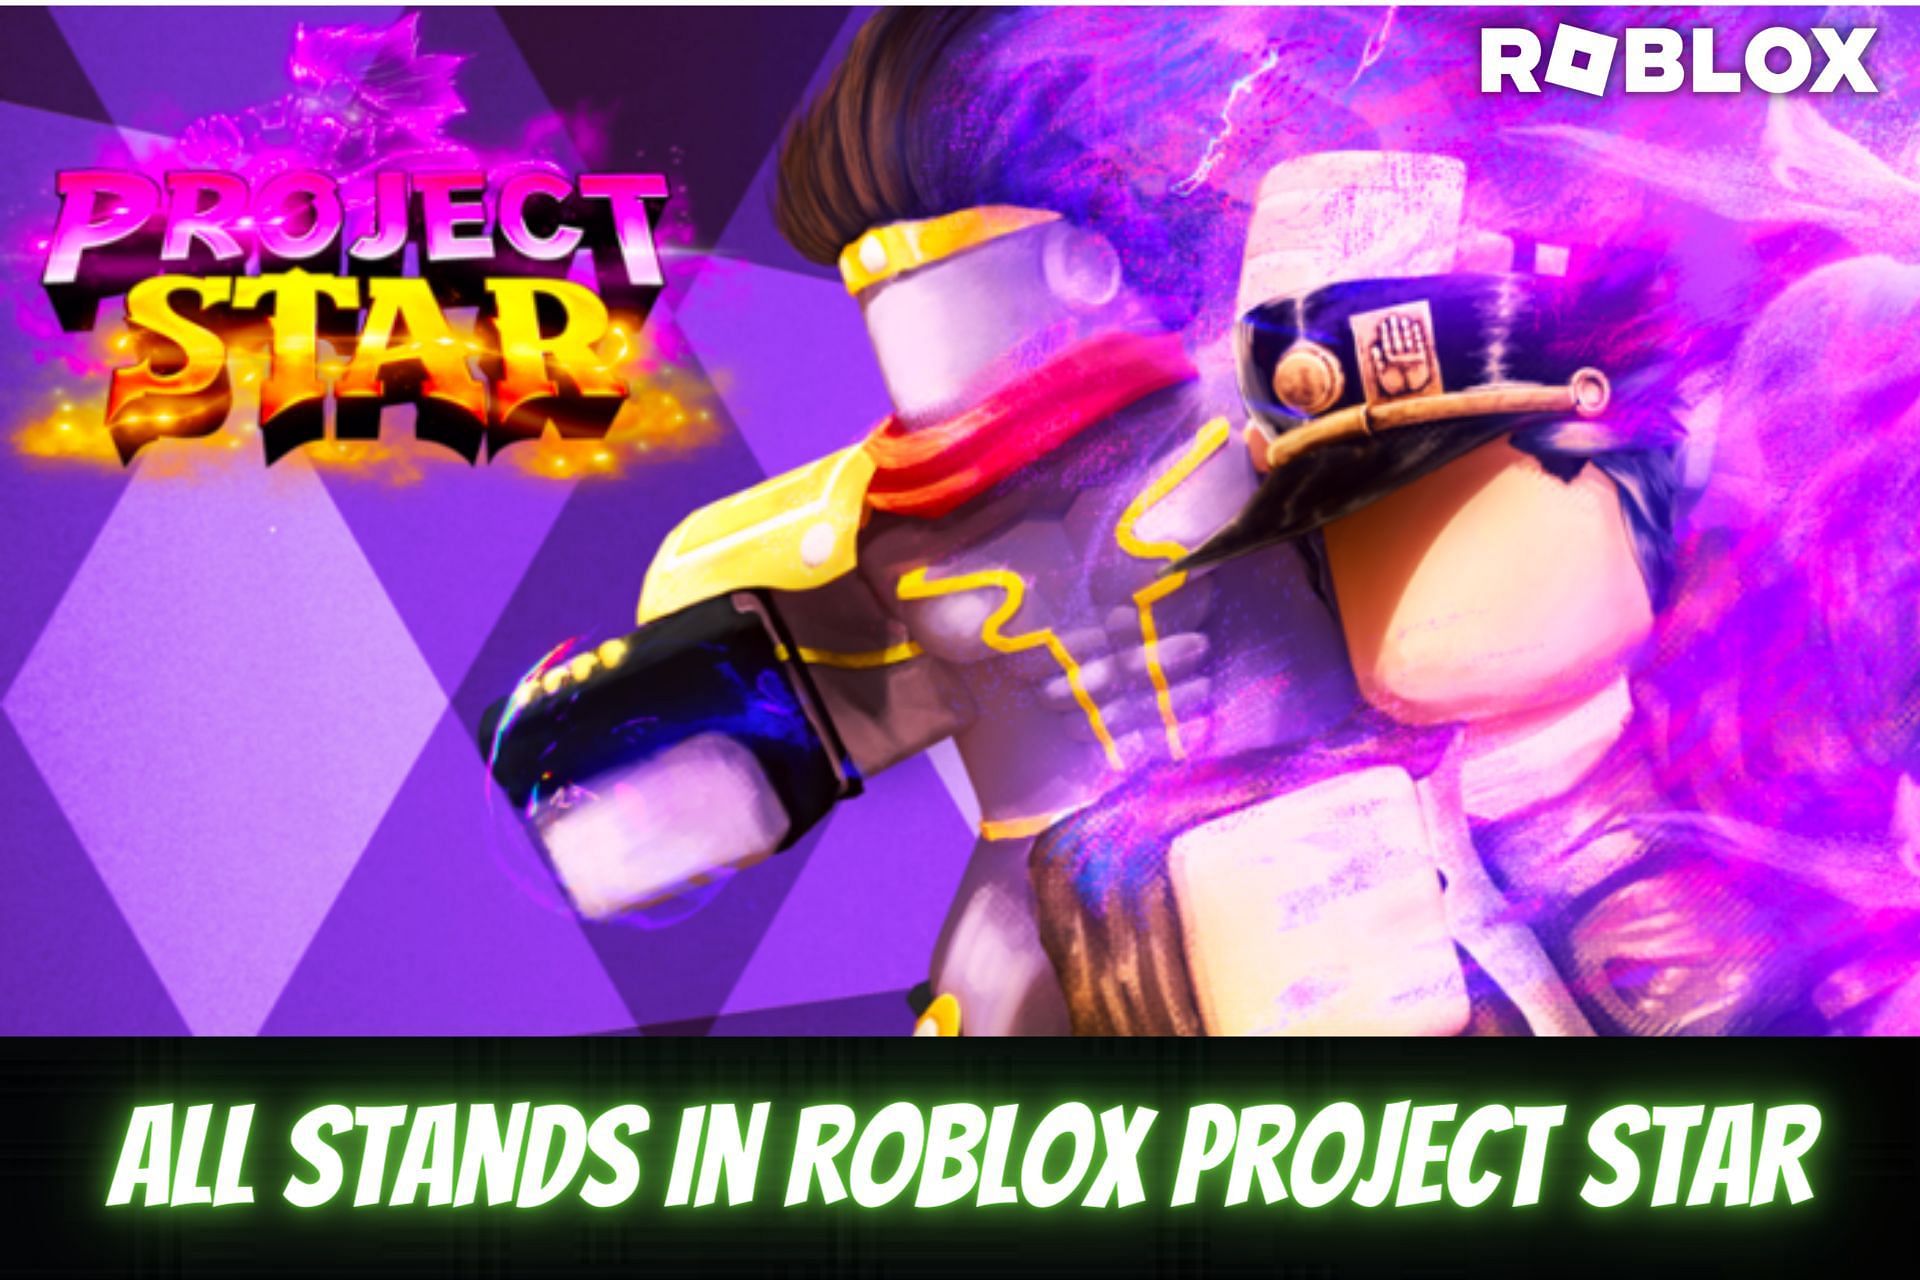 All Stands in Roblox Project Star